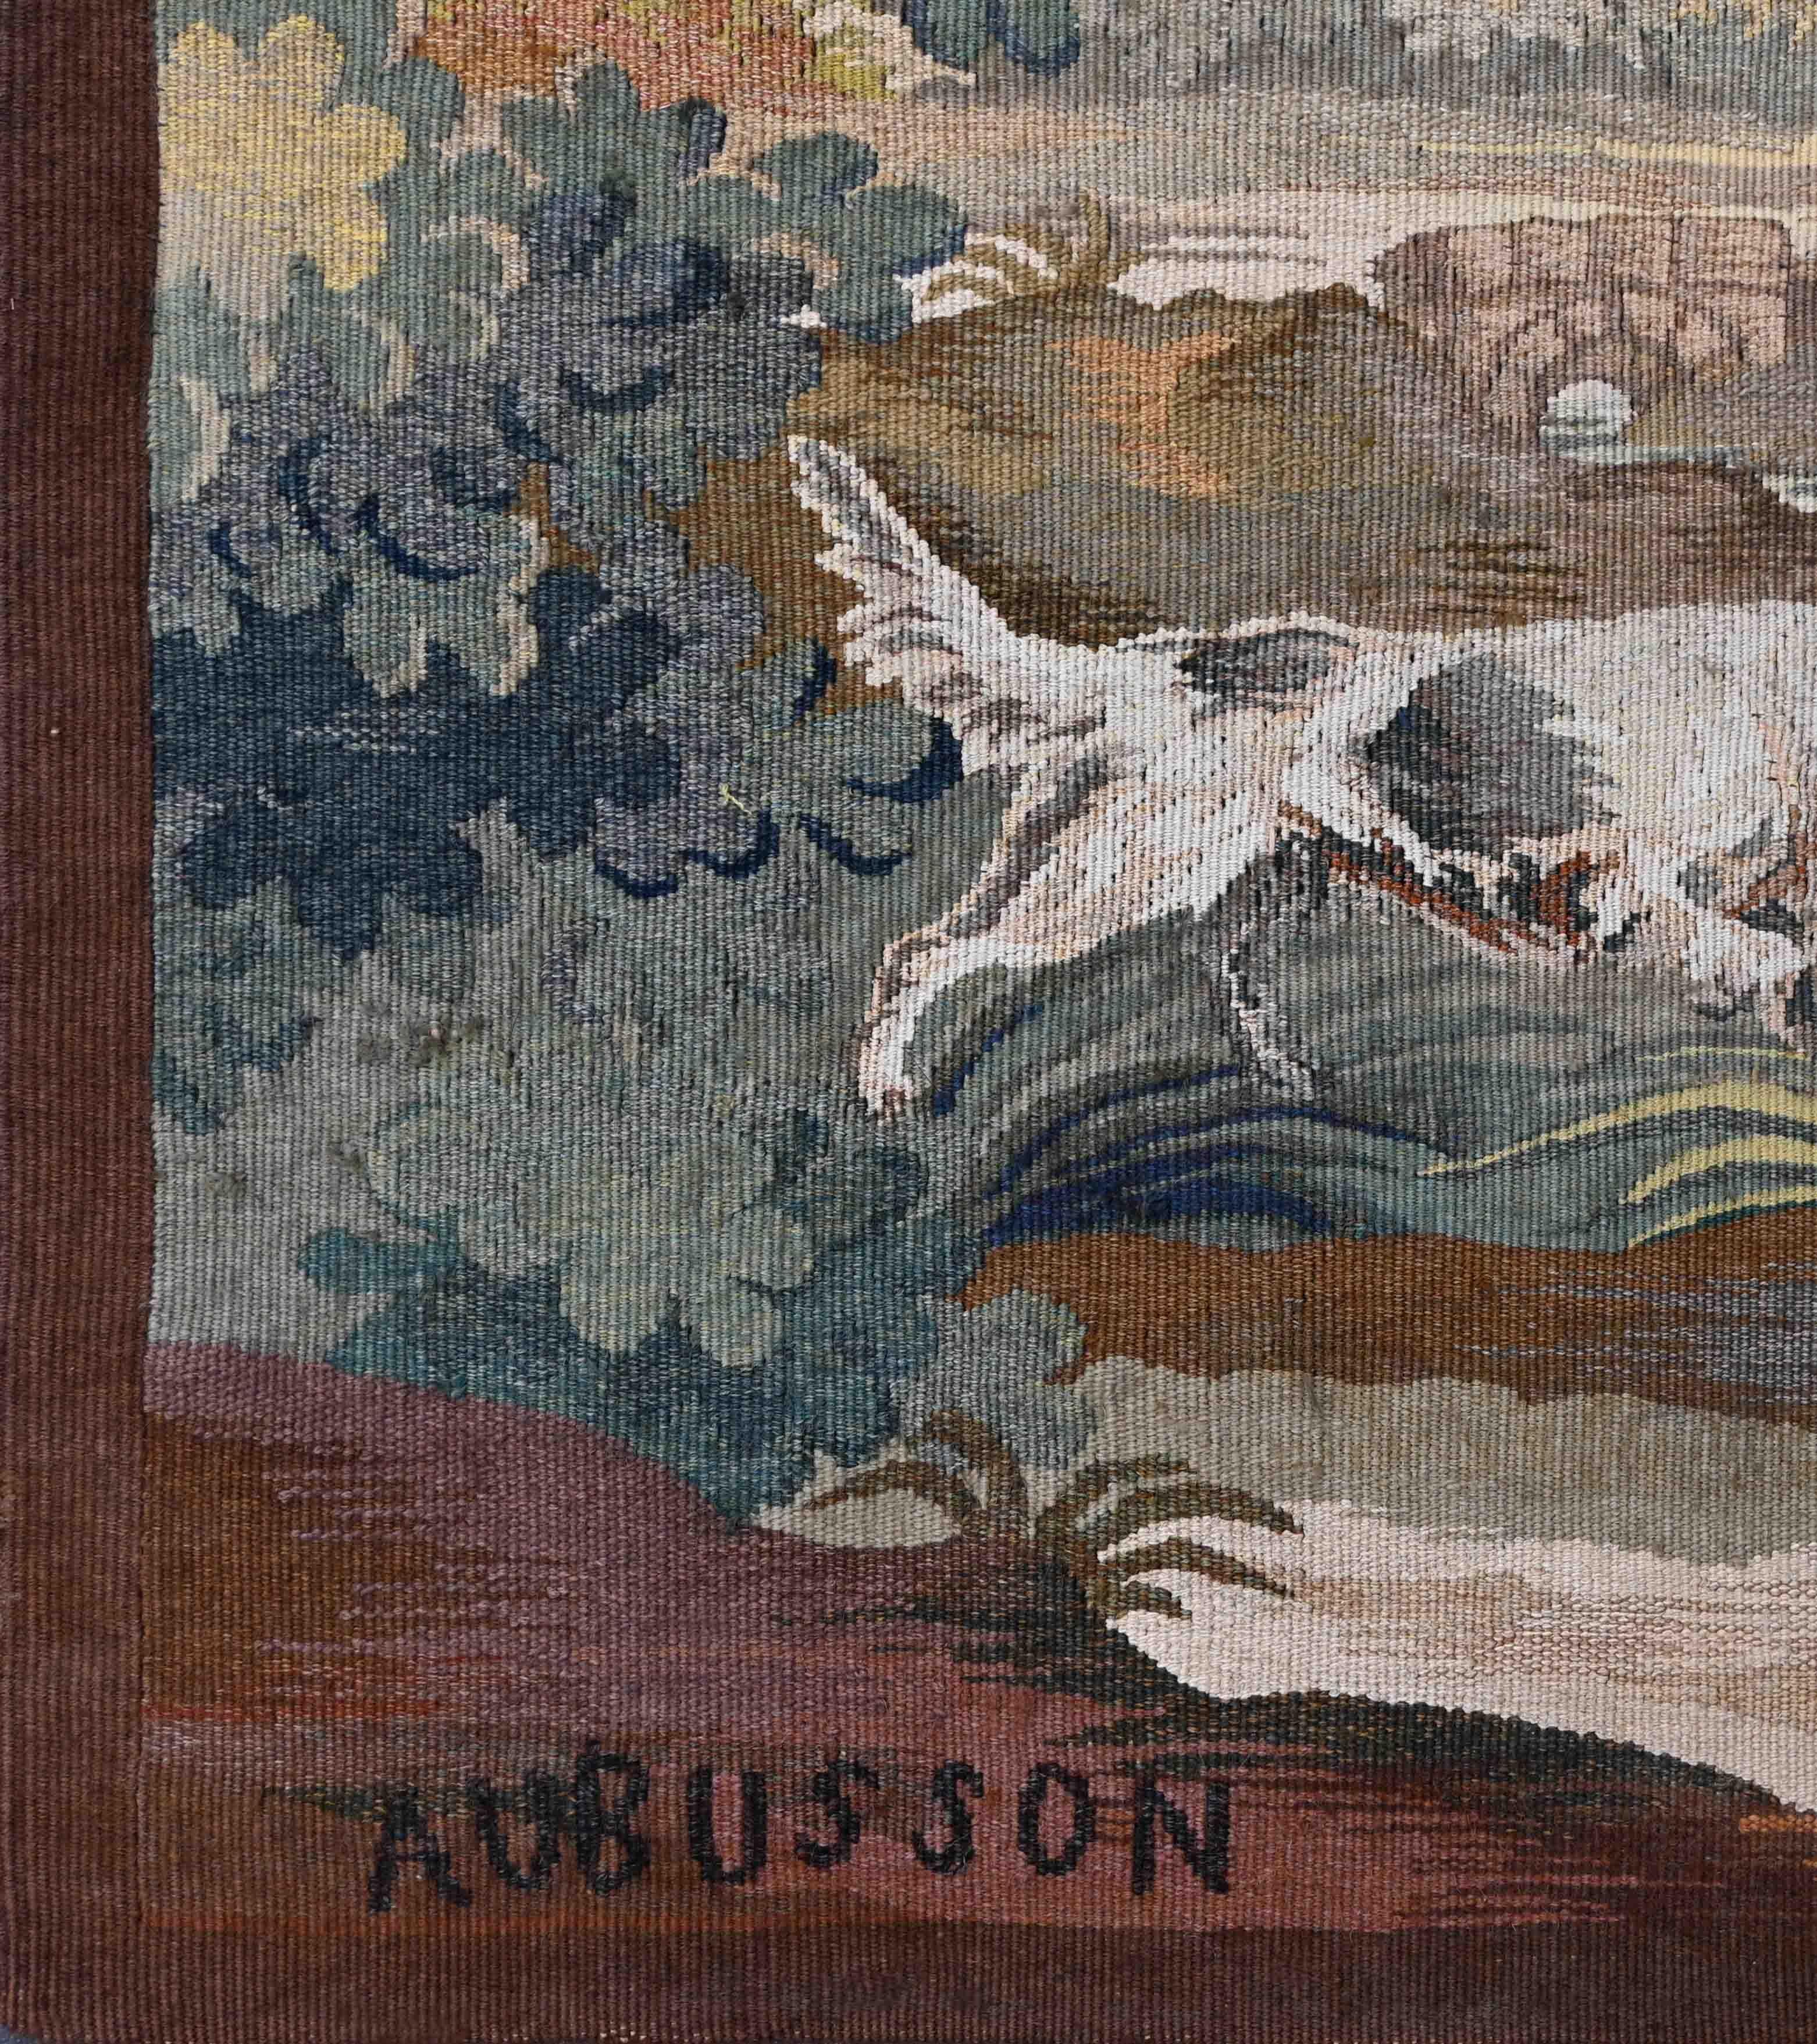 Aubusson Tapestry - The Dog And Pheasant After Jean-baptiste Oudry - N° 1398 In Excellent Condition For Sale In Paris, FR